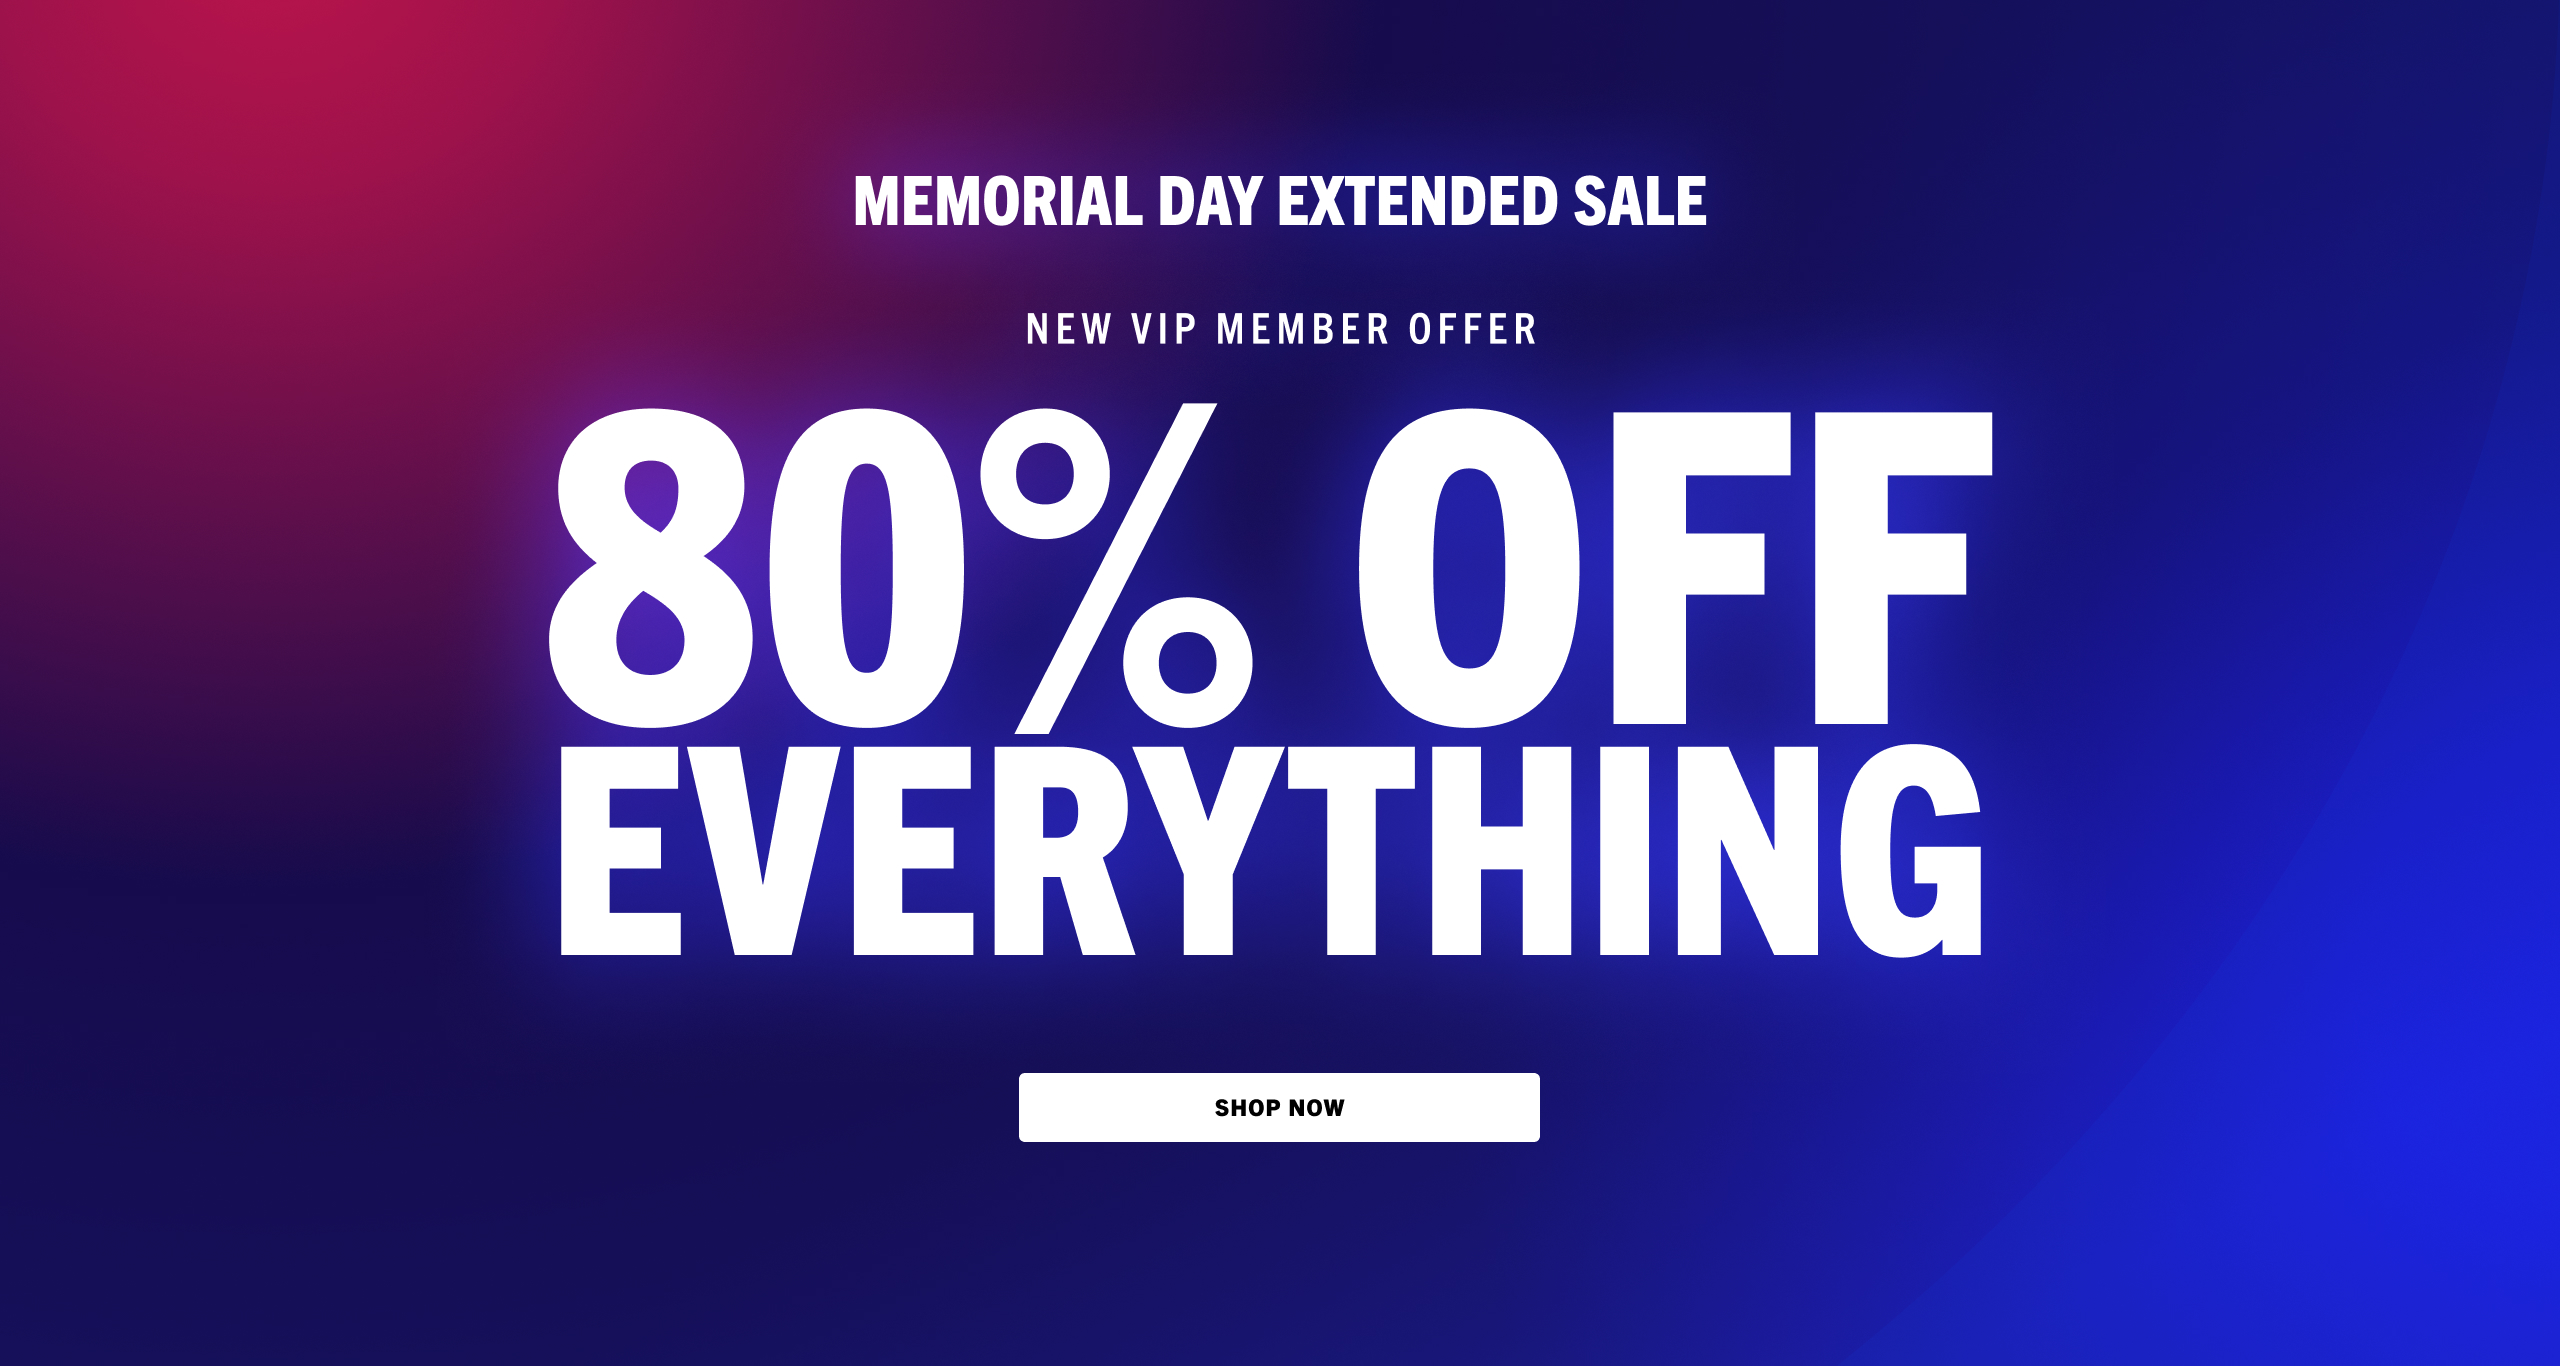 Memorial Day Extended Sale. new vip member offer: 80% off everything.